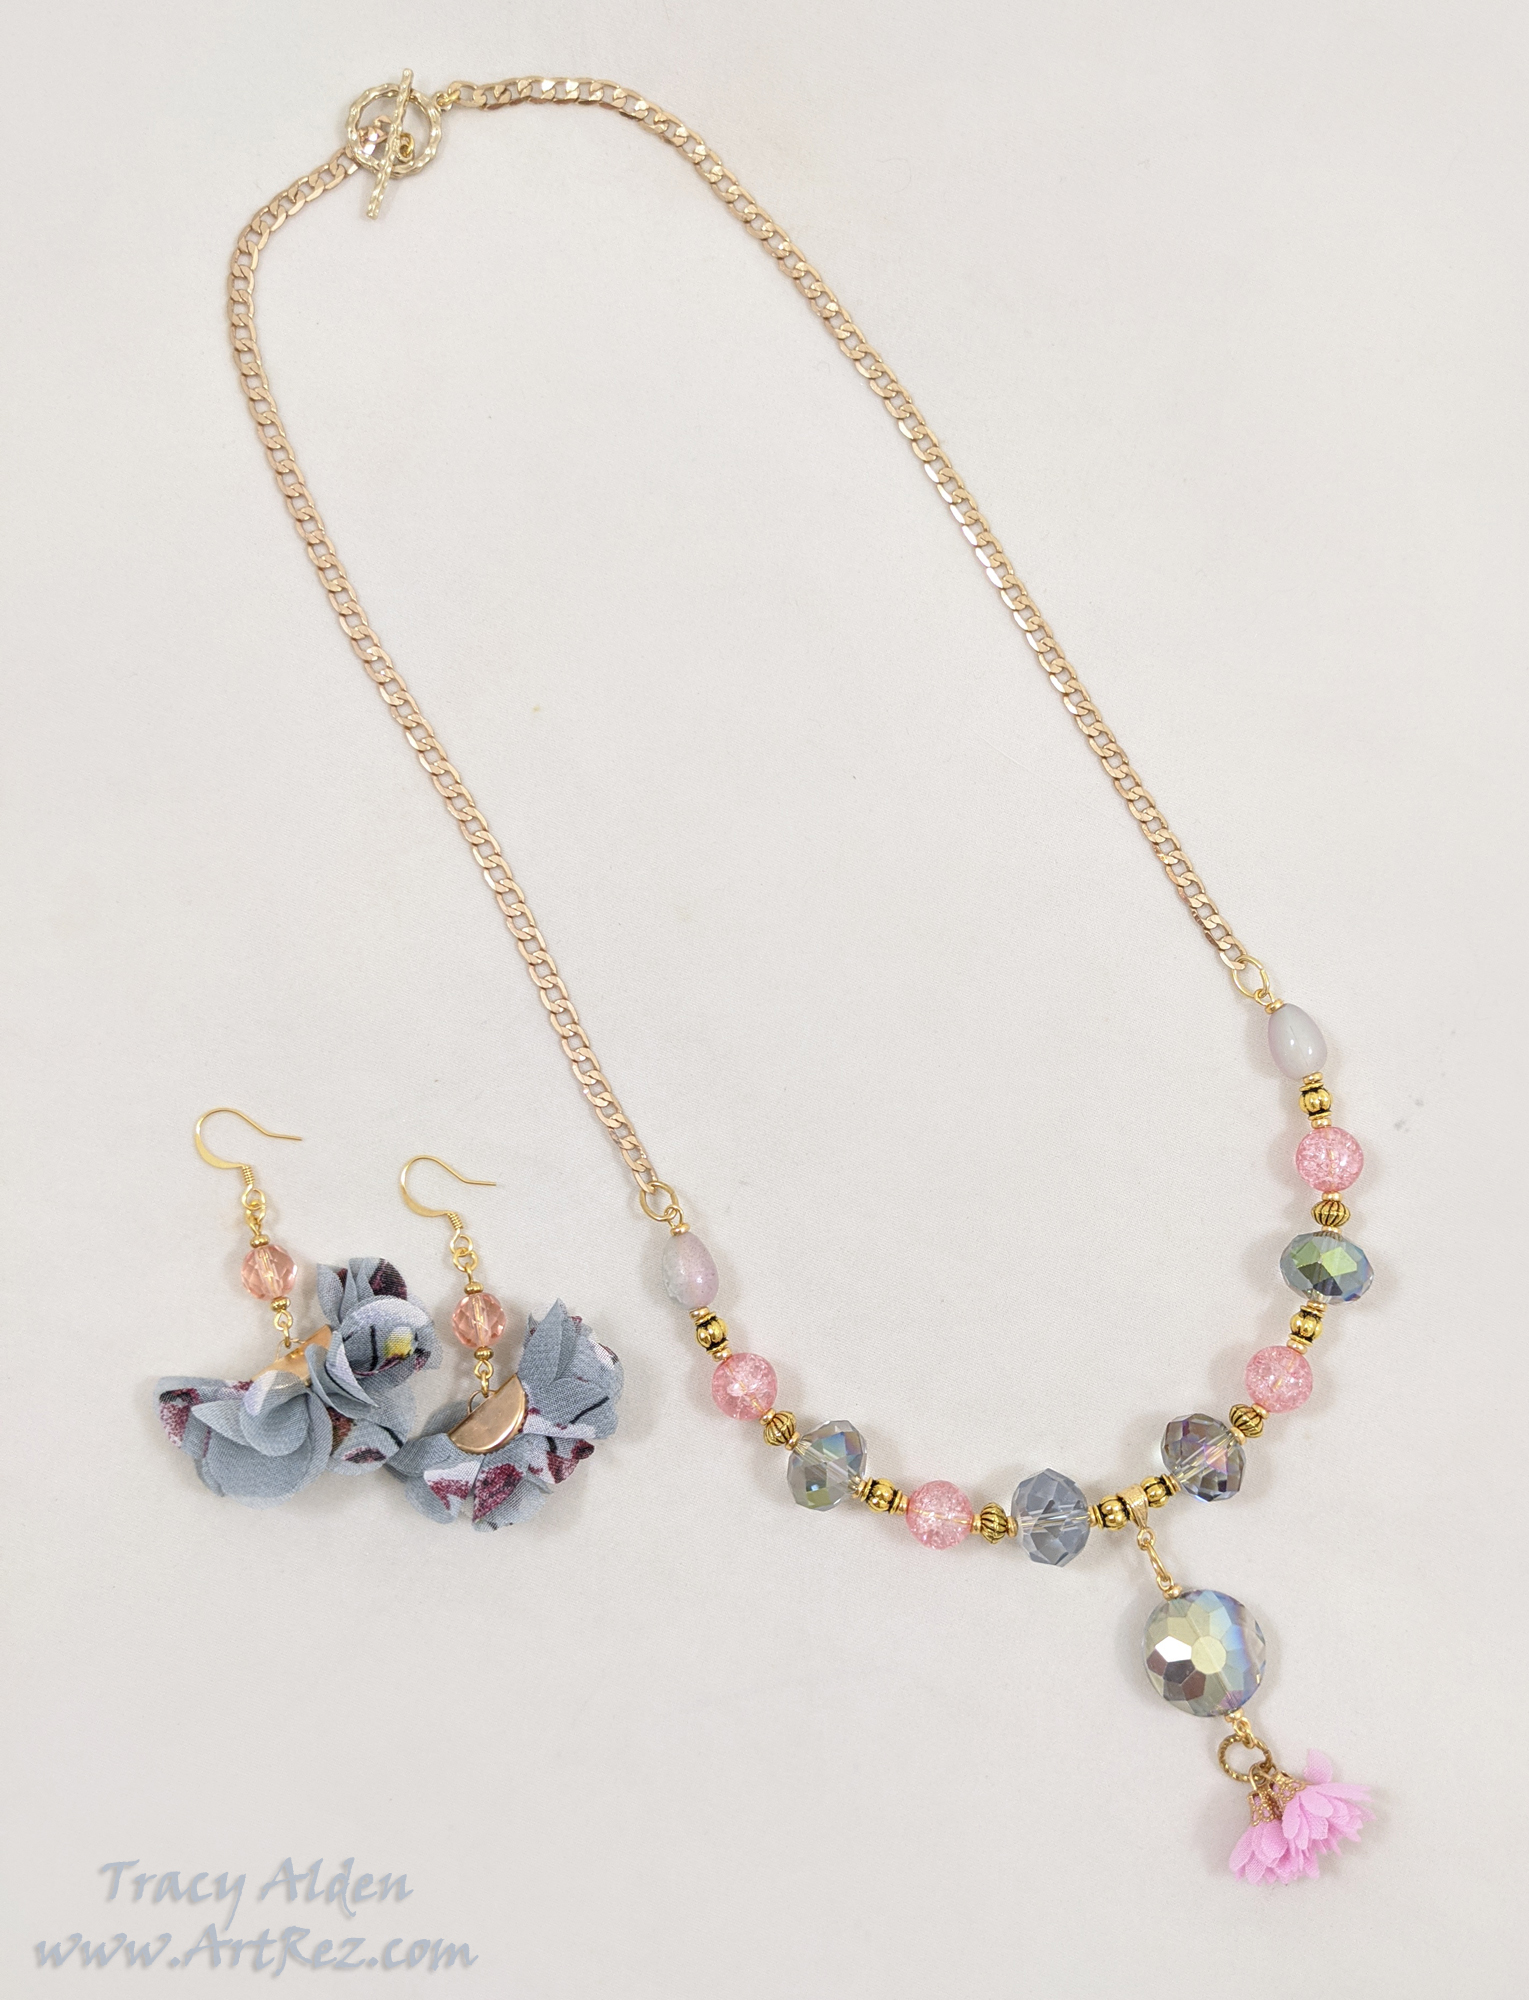 A soft grey and pink necklace set using Jesse James Beads